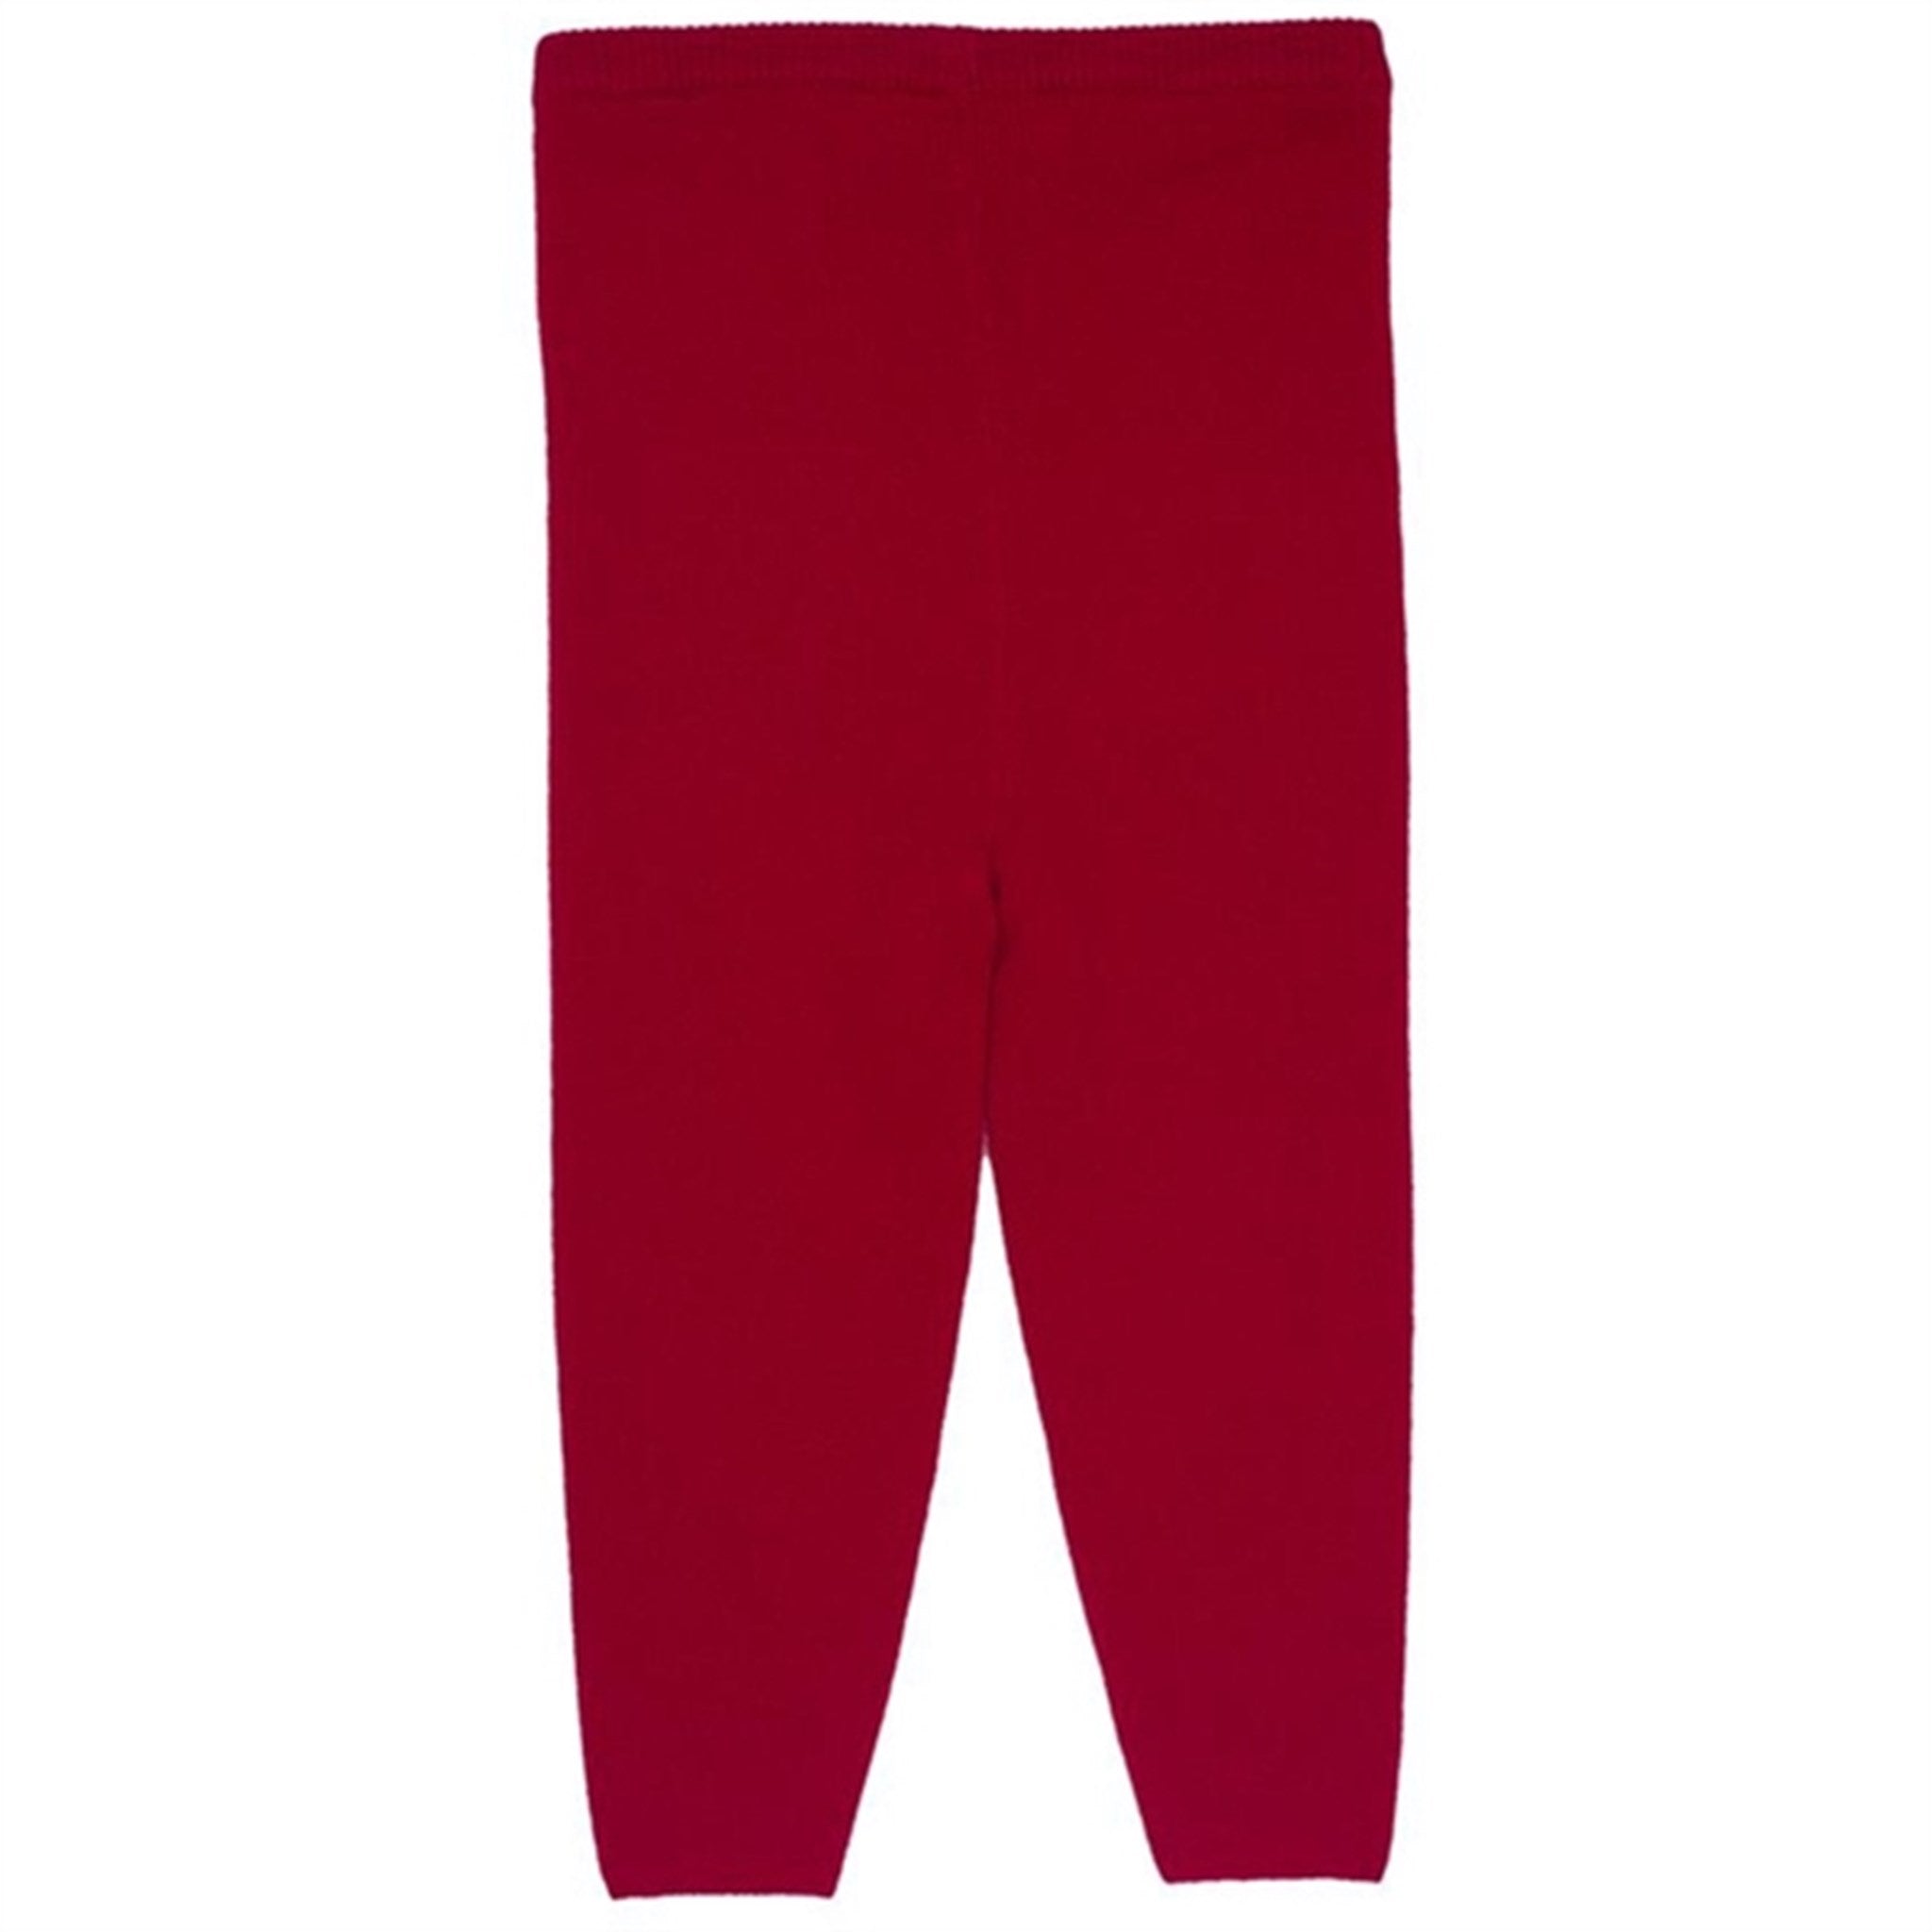 HOLMM Postbox Bailey Cashmere Knit Leggings 4